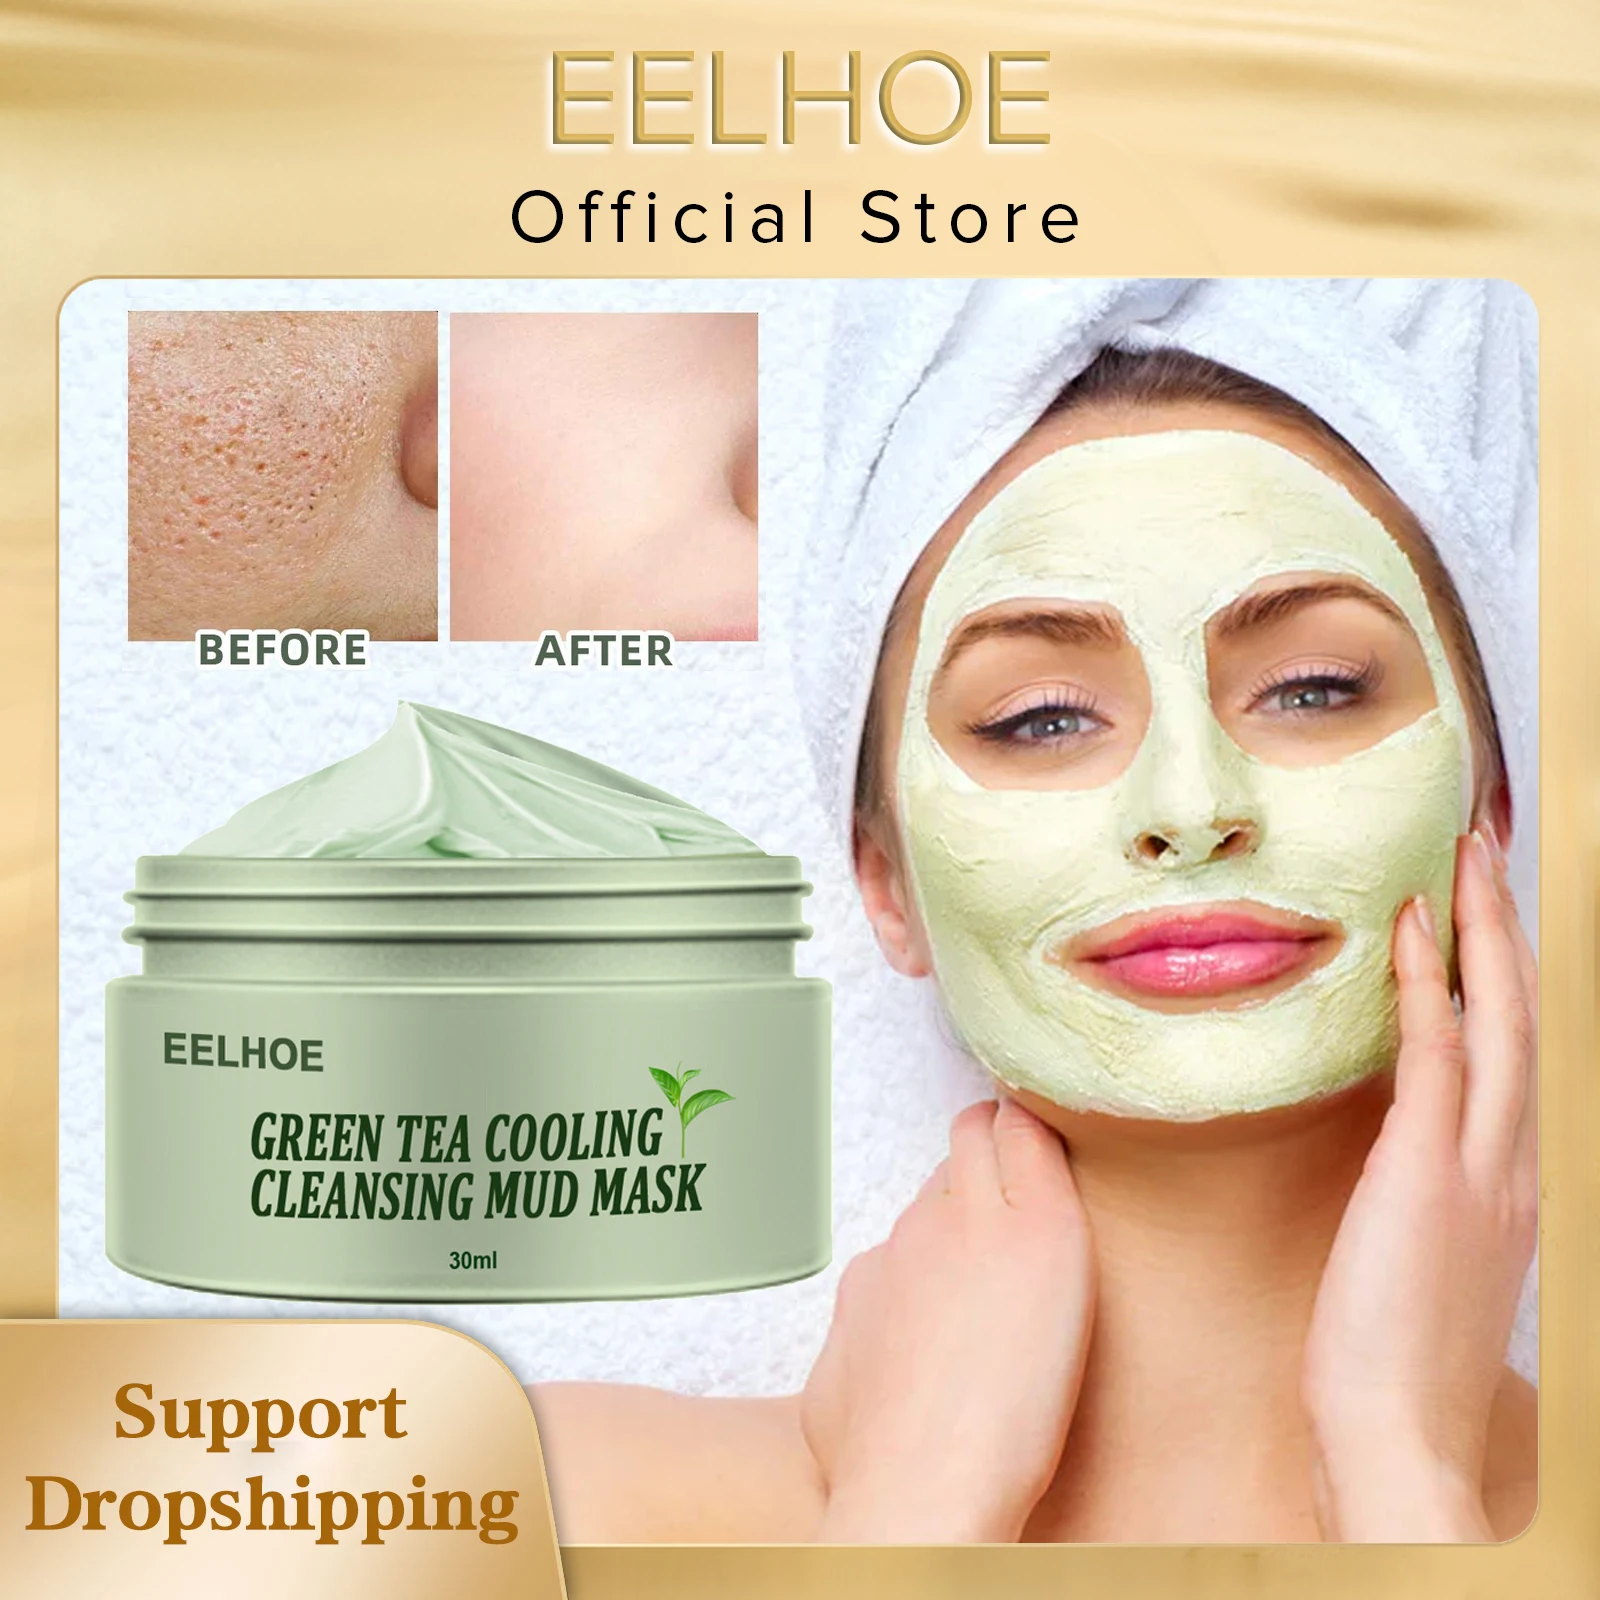 

EELHOE Face Mud Mask Green Tea Cooling Cleansing Mud Mask Deep Remove Blackheads Shrink Pores Firming Purifying Facial Skin Care